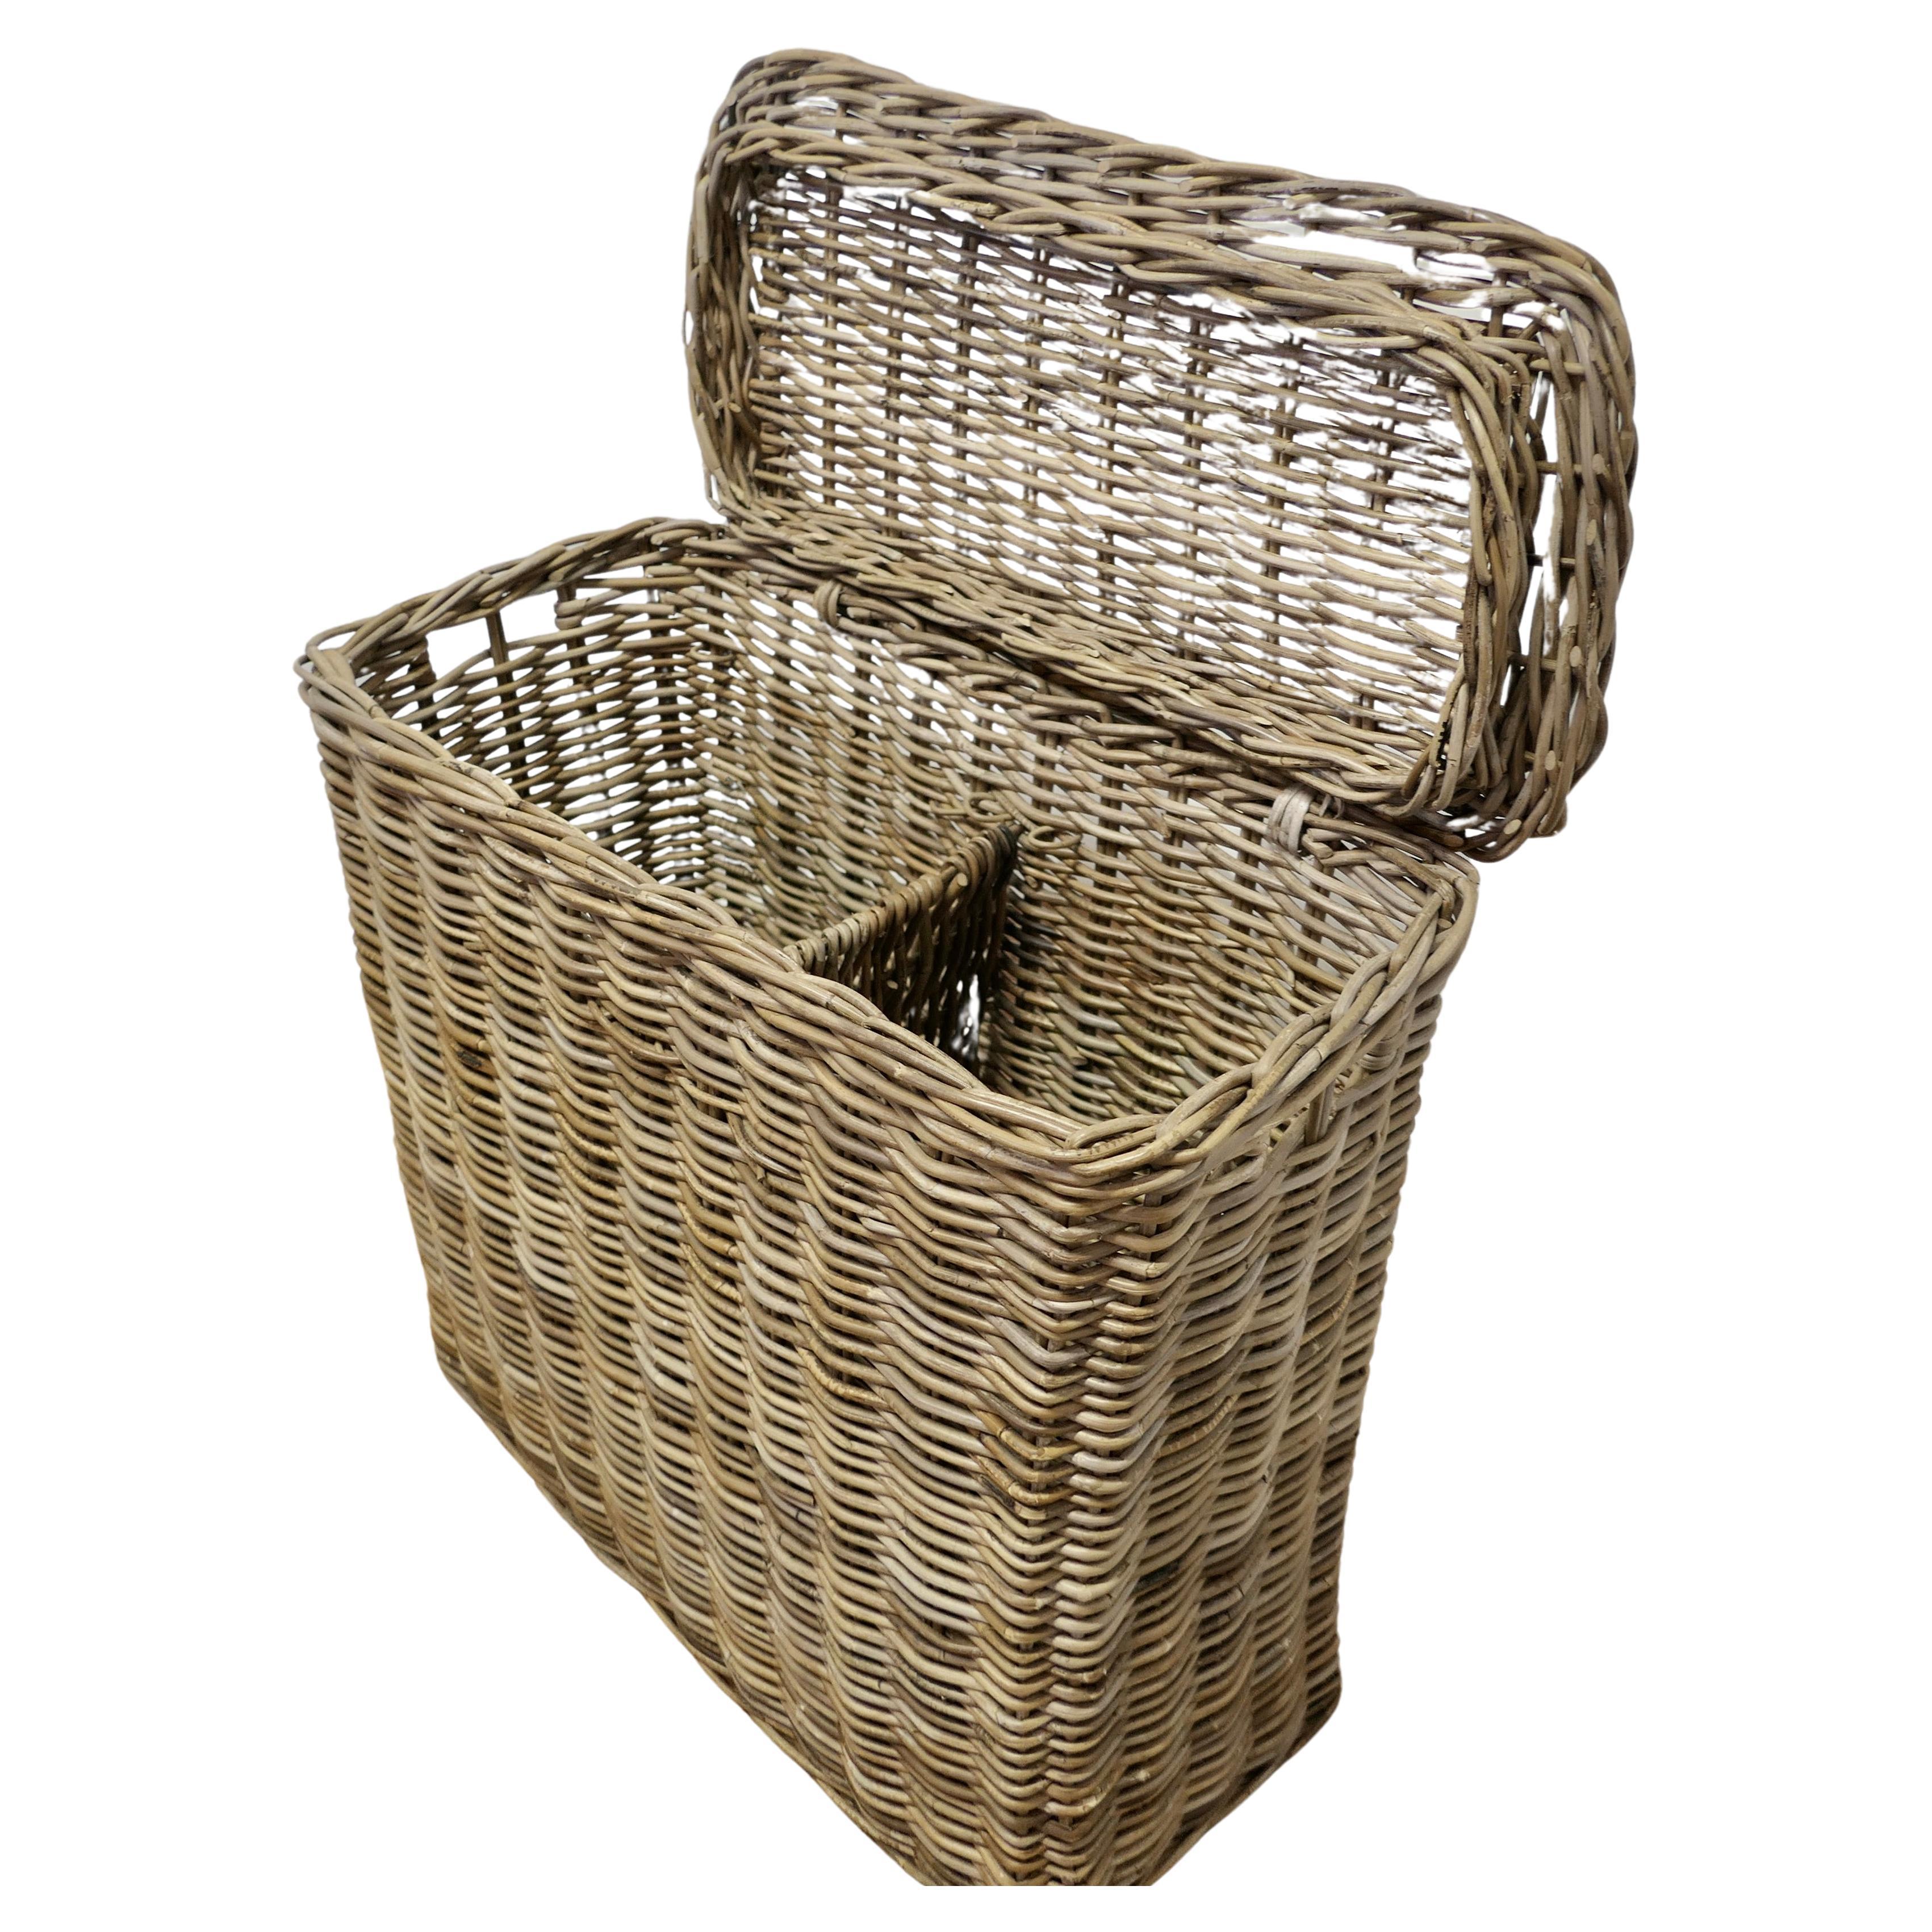 Vintage French Wicker Laundry Basket with Lid  This is an excellent example and 